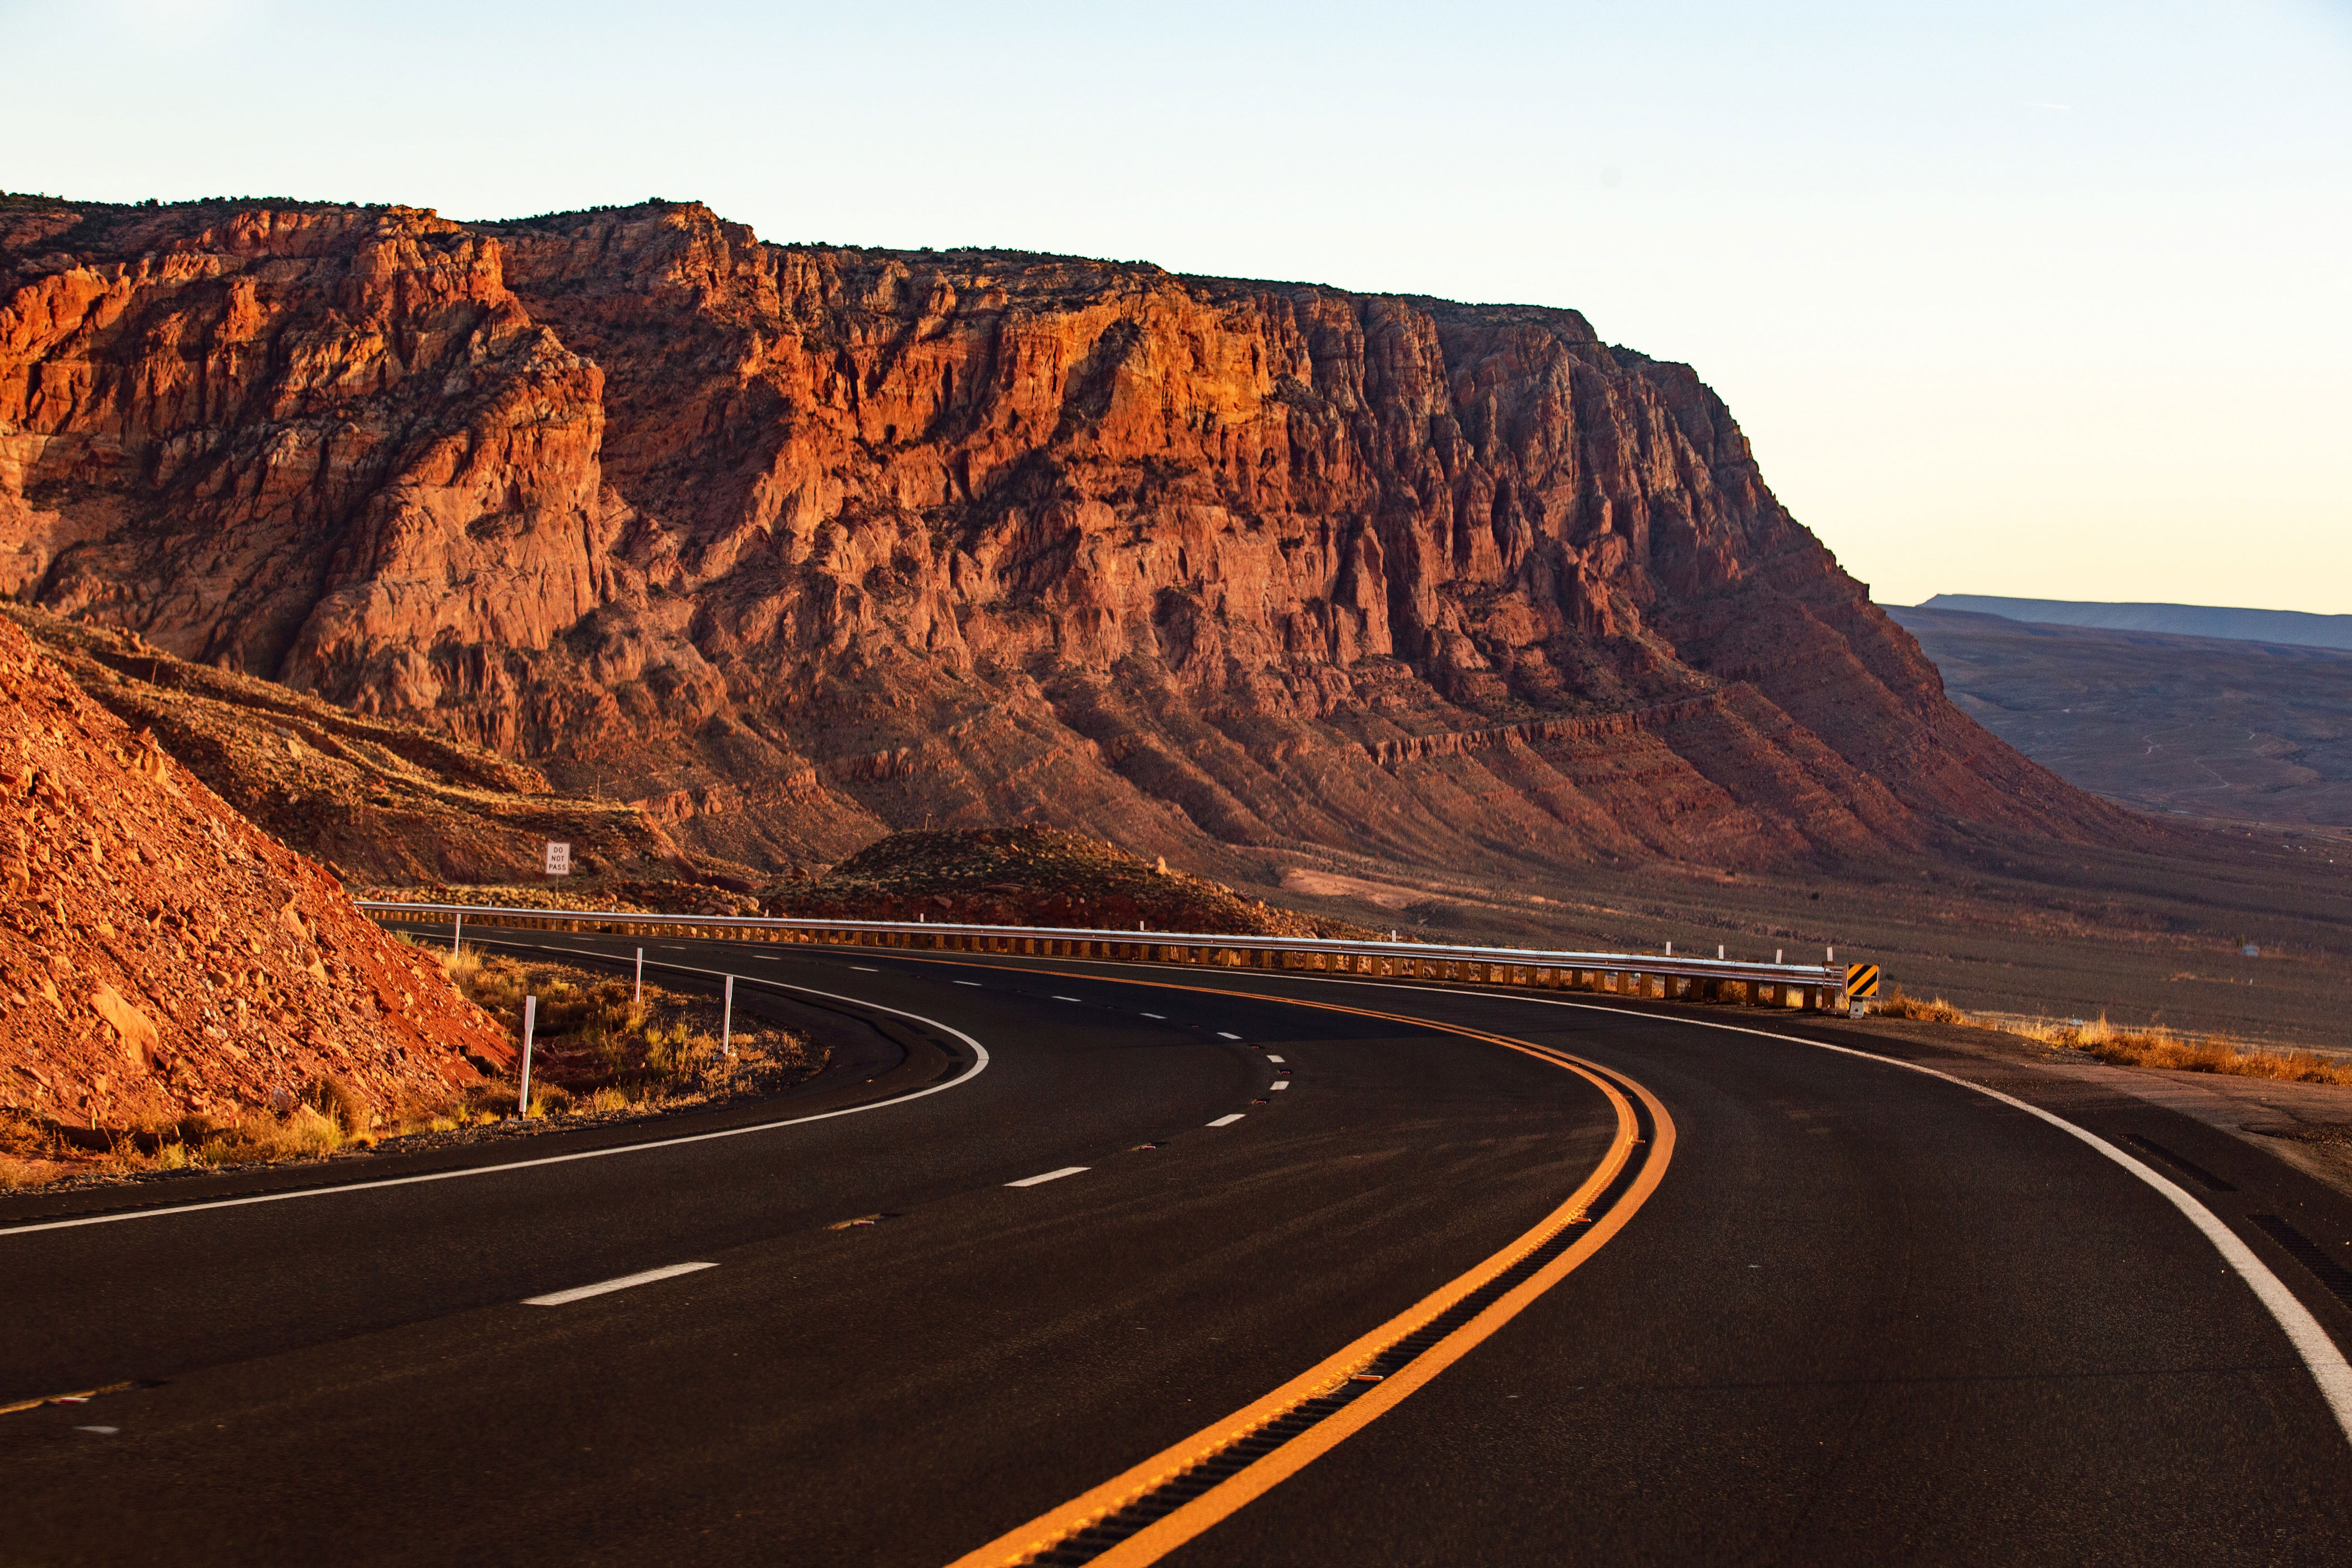 <p>I-15 runs from San Diego to Montana, carving off the westernmost quarter of the country from the rest. The best stretch to drive, though, is the chunk between Utah to Nevada. Choose the leisurely route from <a href="https://www.cntraveler.com/destinations/las-vegas?mbid=synd_msn_rss&utm_source=msn&utm_medium=syndication">Las Vegas</a> to the Grand Canyon's South Rim, passing by the Hoover Dam, Lake Mead, Lake Powell, Zion National Park, Antelope Canyon, and Arizona's Painted Desert, which more than lives up to its name. Give yourself at least four days (better yet, a week). There’s simply nothing like the contrast between man-made neon–and utter glitz-and-glam of the Las Vegas Strip—versus the pinks, purples, and dusty reds of the deserts in Arizona and Utah.</p> <p><strong>Where to stop:</strong> Make Springdale, Utah, outside Zion your first base camp and take a half-day private tour of the national park before a spa day at the ultra-luxe <a href="https://www.cntraveler.com/hotels/united-states/canyon-point/amangiri-canyon-point?mbid=synd_msn_rss&utm_source=msn&utm_medium=syndication">Amangiri</a> resort. Save time for a boat tour of Lake Powell, and for photo ops of the otherworldly Antelope Canyon.</p> <p><strong>Where to eat:</strong> There’s a surprising energy in Flagstaff, originally founded as a pitstop on the wagon road, thanks to the Northern Arizona University campus there. Downtown has a pleasant roster of cafes, bars, and craft breweries—follow the <a href="https://craftbeerflg.com/">trail here</a>—as well as an outstanding Southwest-Tex Mex scene; try the tacos at <a href="https://www.salsabravaflagstaff.com/">Salsa Brava.</a></p> <p><strong>Where to stay:</strong> Channel your inner <em>Easy Rider</em> in downtown Flagstaff with a night at the <a href="https://www.modubeau.com/">Motel du Beau</a> where both John Ford and John Wayne once stayed; the 1929-built hotel has a gloriously retro charm. You can also stay at Amangiri, of course, or the chalet-like <a href="https://www.grandcanyonlodges.com/lodging/el-tovar-hotel/">El Tovar</a>, which hugs the edge of the southern rim of the Grand Canyon.</p><p>Sign up to receive the latest news, expert tips, and inspiration on all things travel</p><a href="https://www.cntraveler.com/newsletter/the-daily?sourceCode=msnsend">Inspire Me</a>